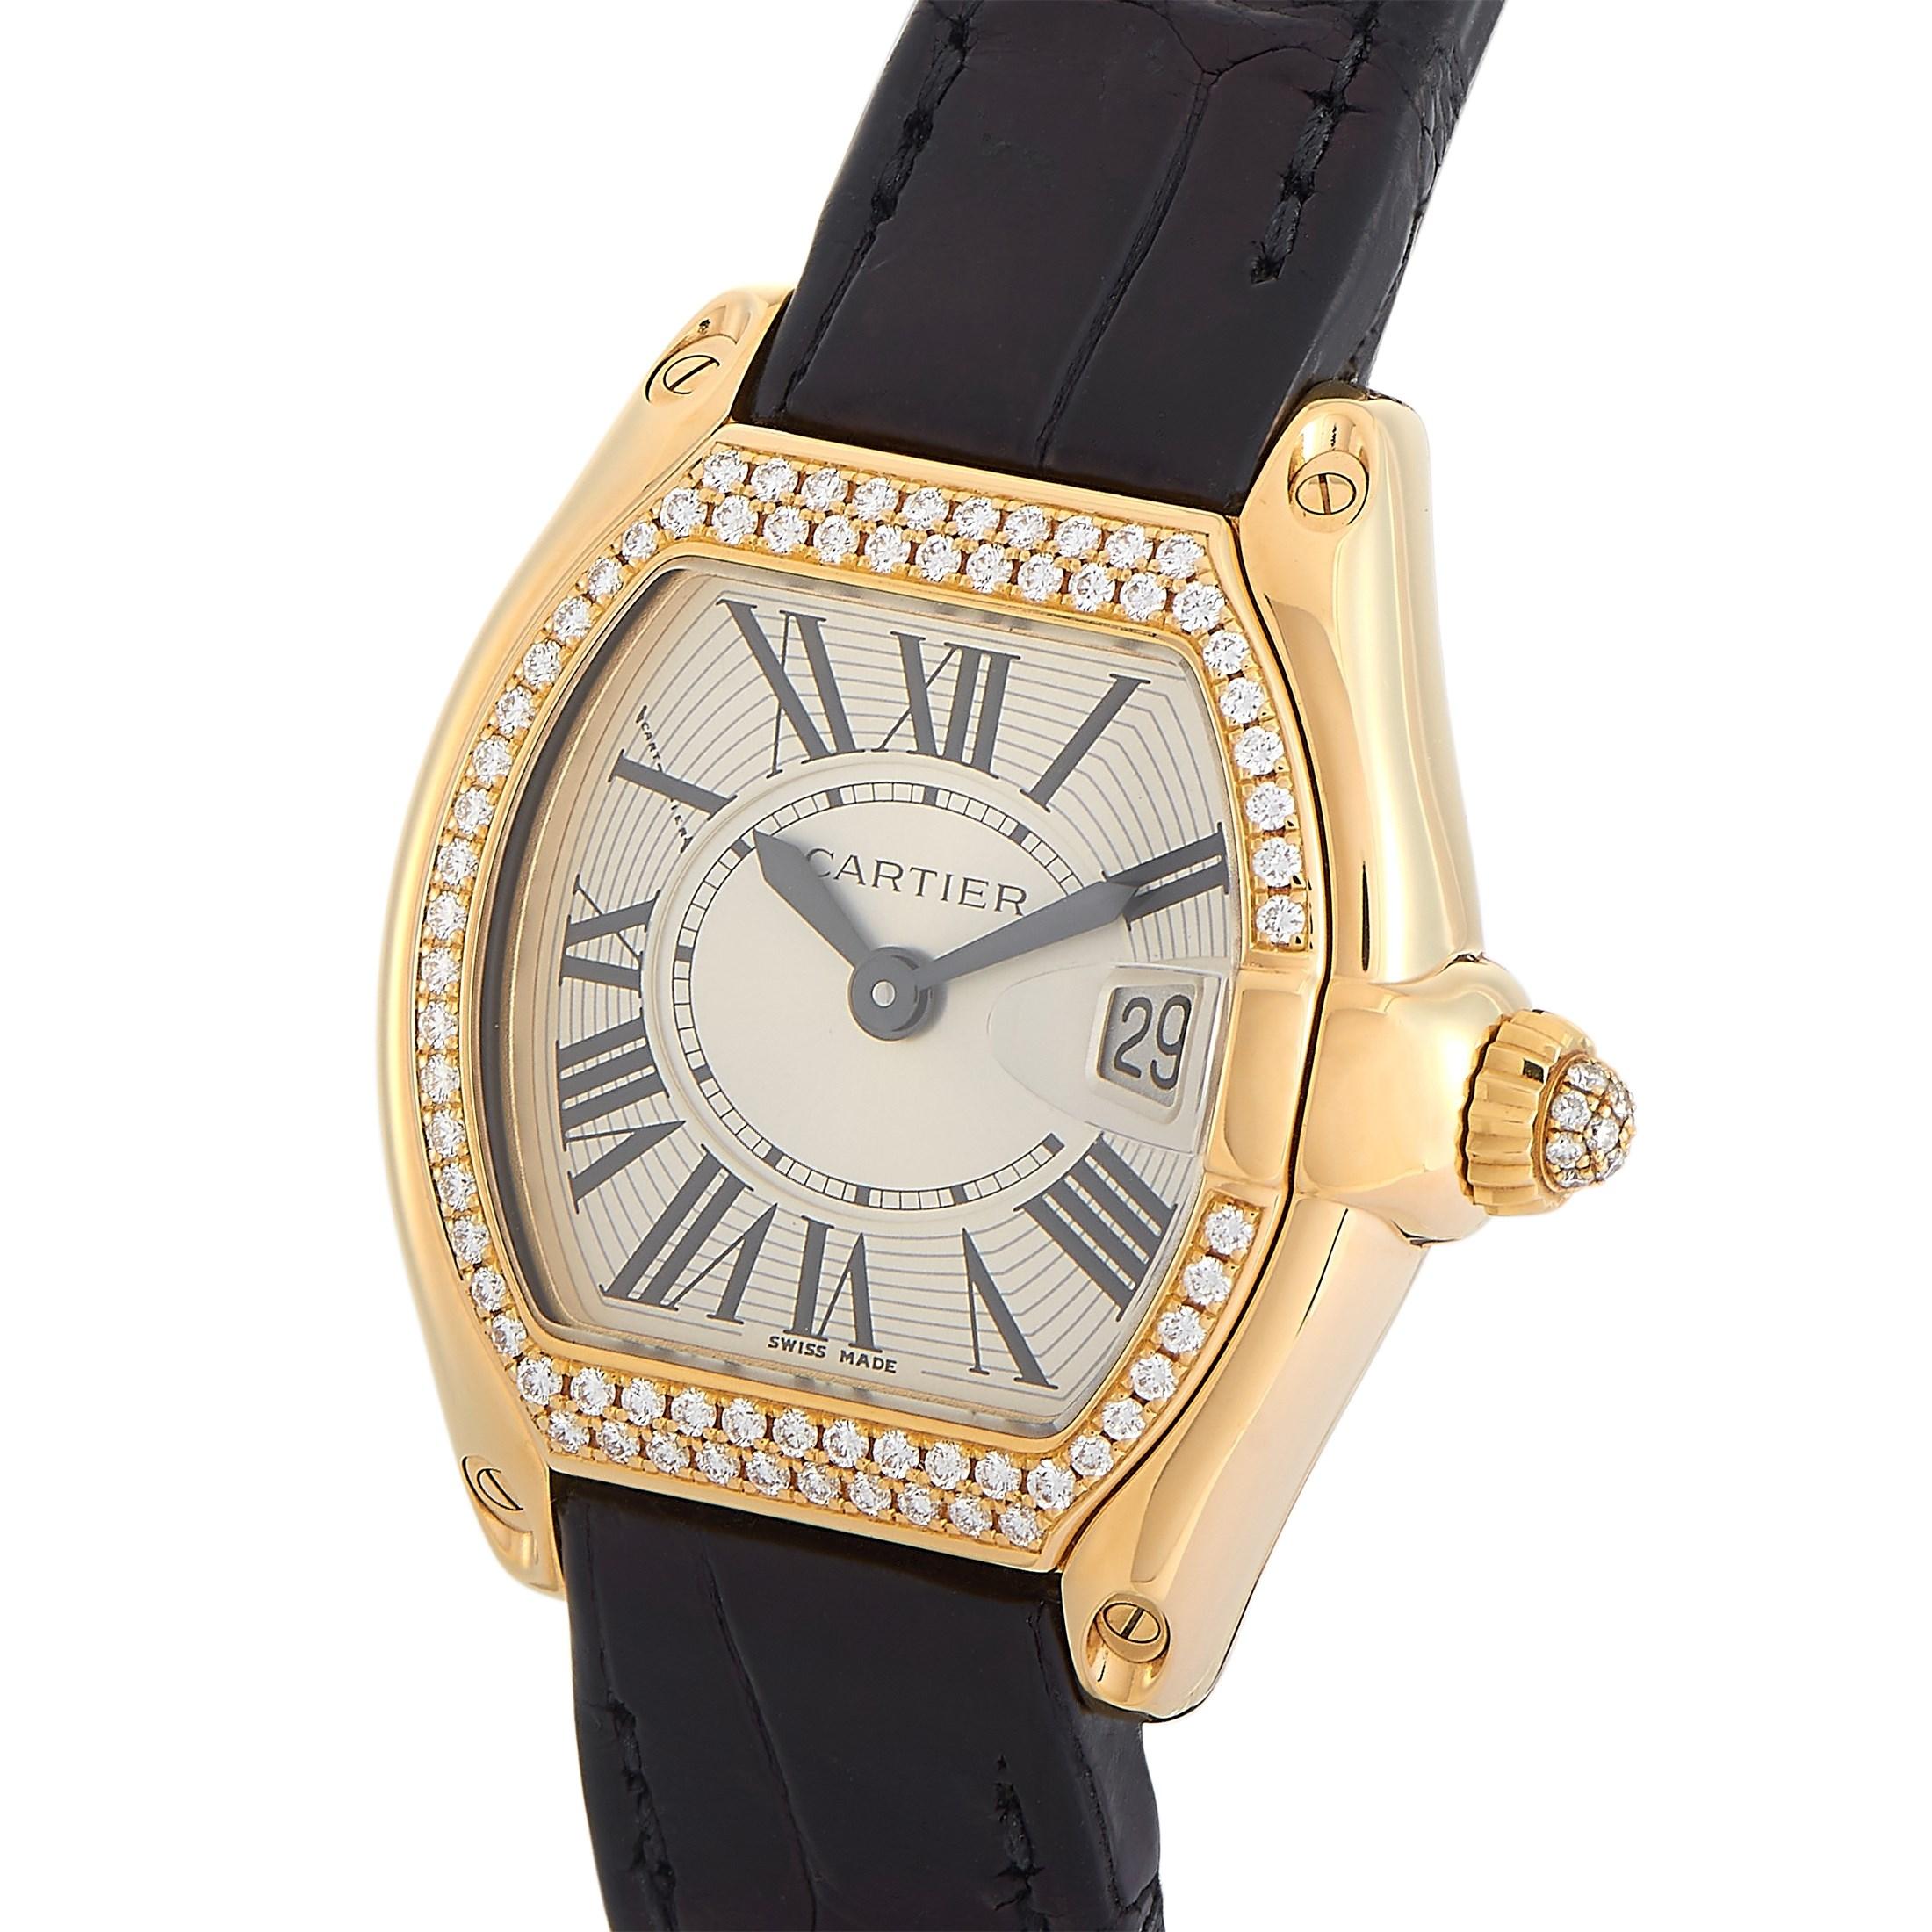 Add some glitter to your wrist with this Cartier Roadster 18K Yellow Gold Diamond Bezel Swiss Quartz Ladies Watch 2676. The 18K yellow gold case measures 31mm by 37mm and features a diamond-set bezel. Even the pull/push crown is set with glittering